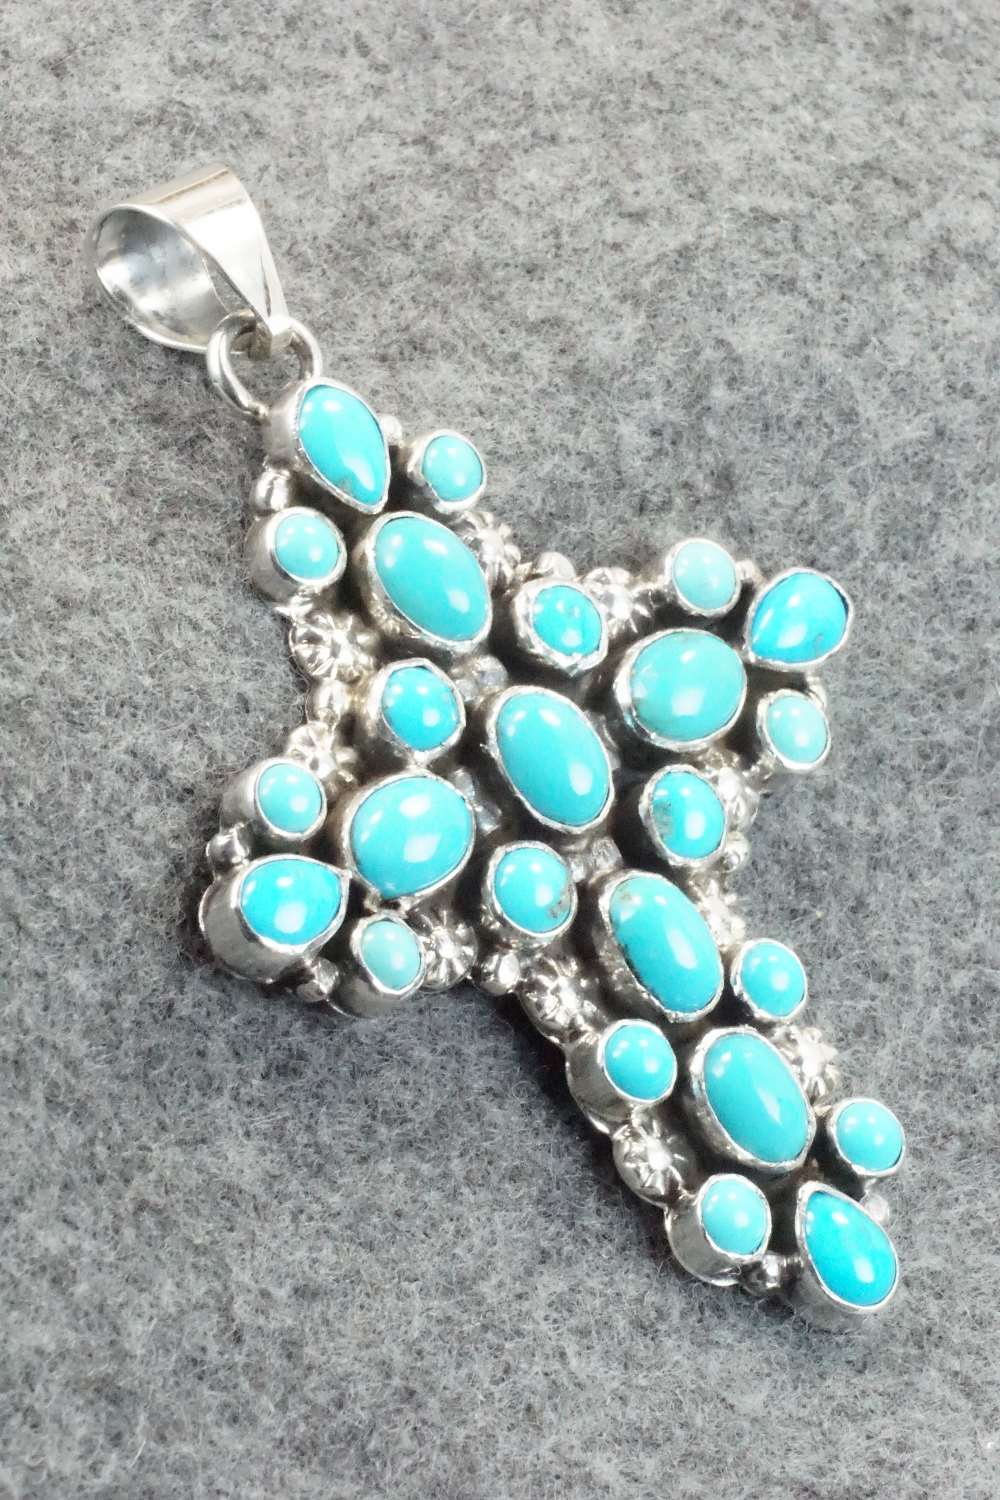 Turquoise & Sterling Silver Pendant - Roie Jaque